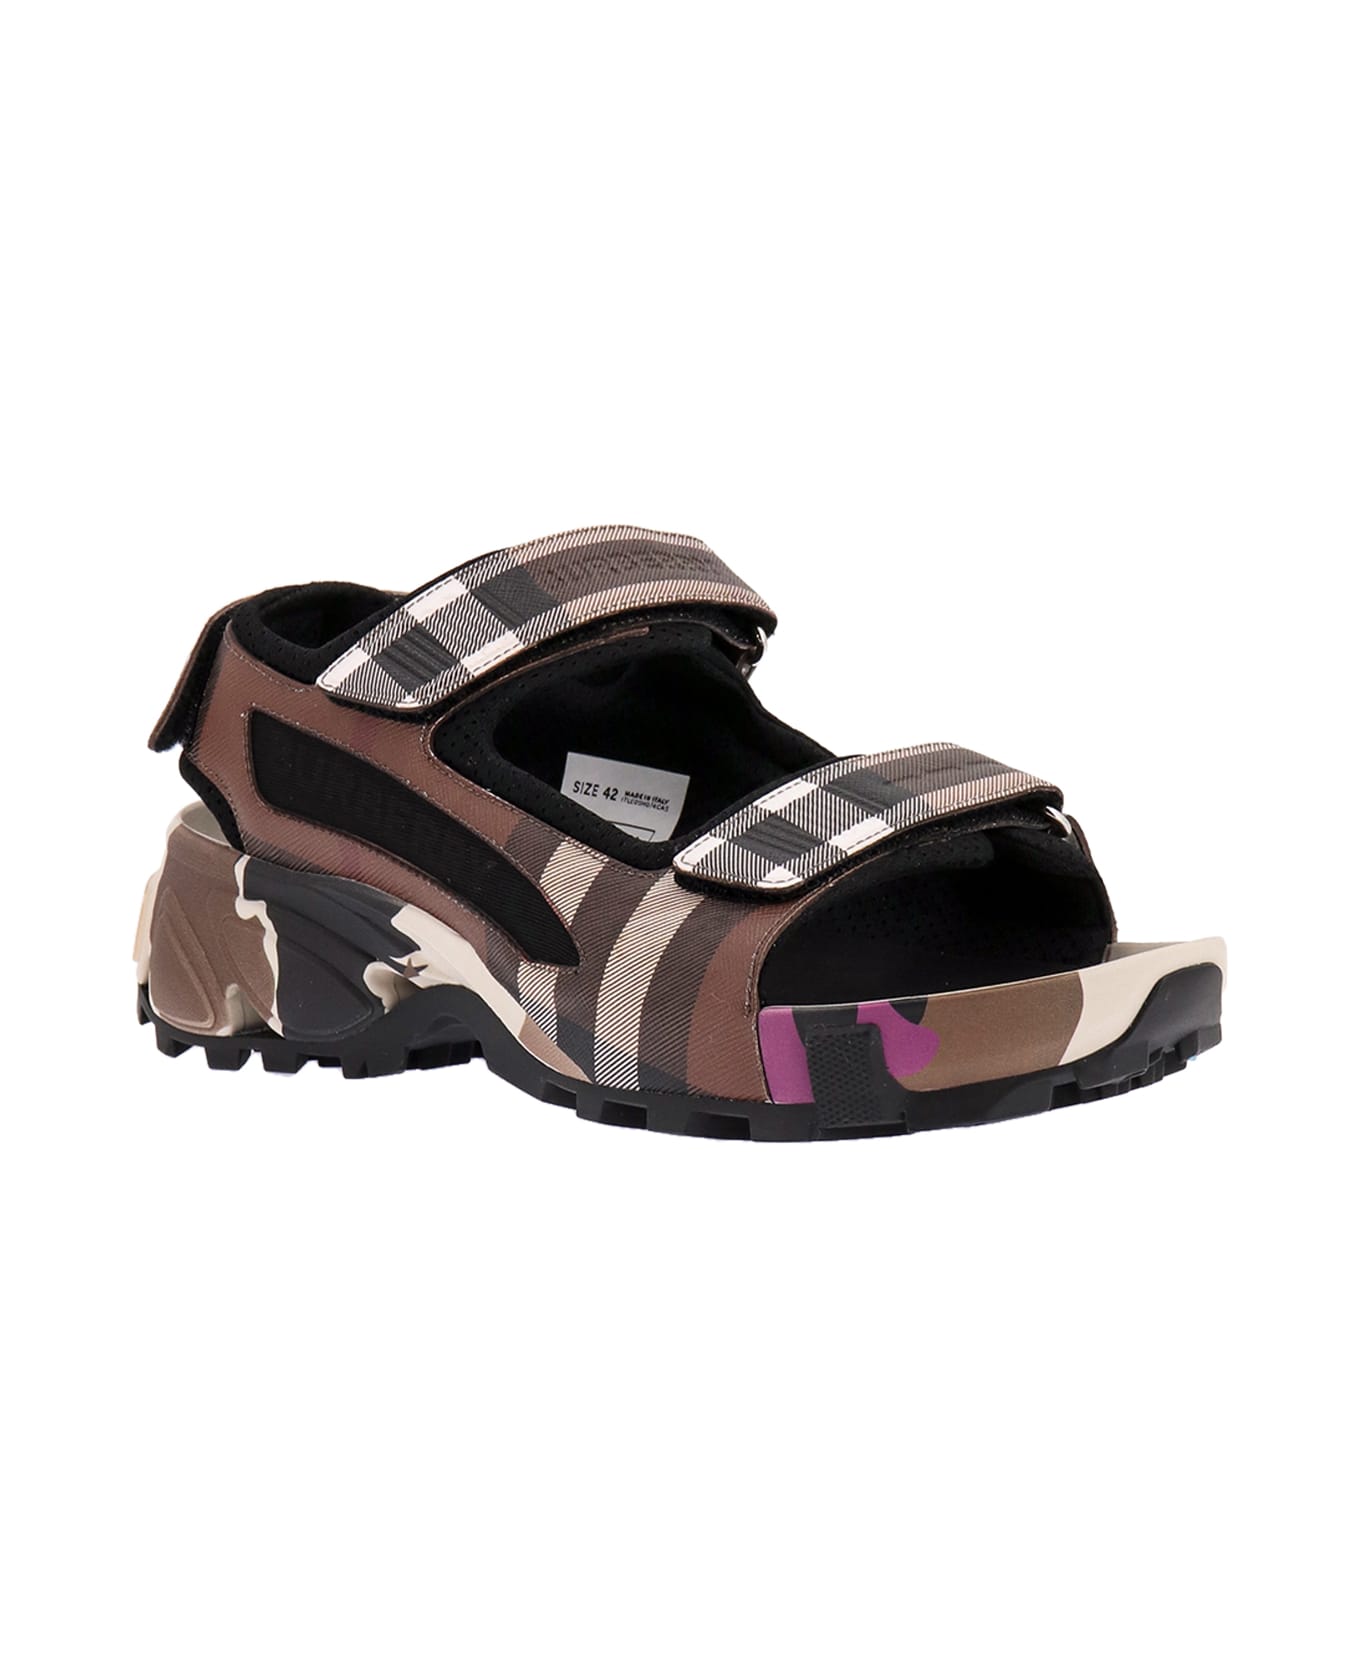 Burberry Sandals - Brown その他各種シューズ